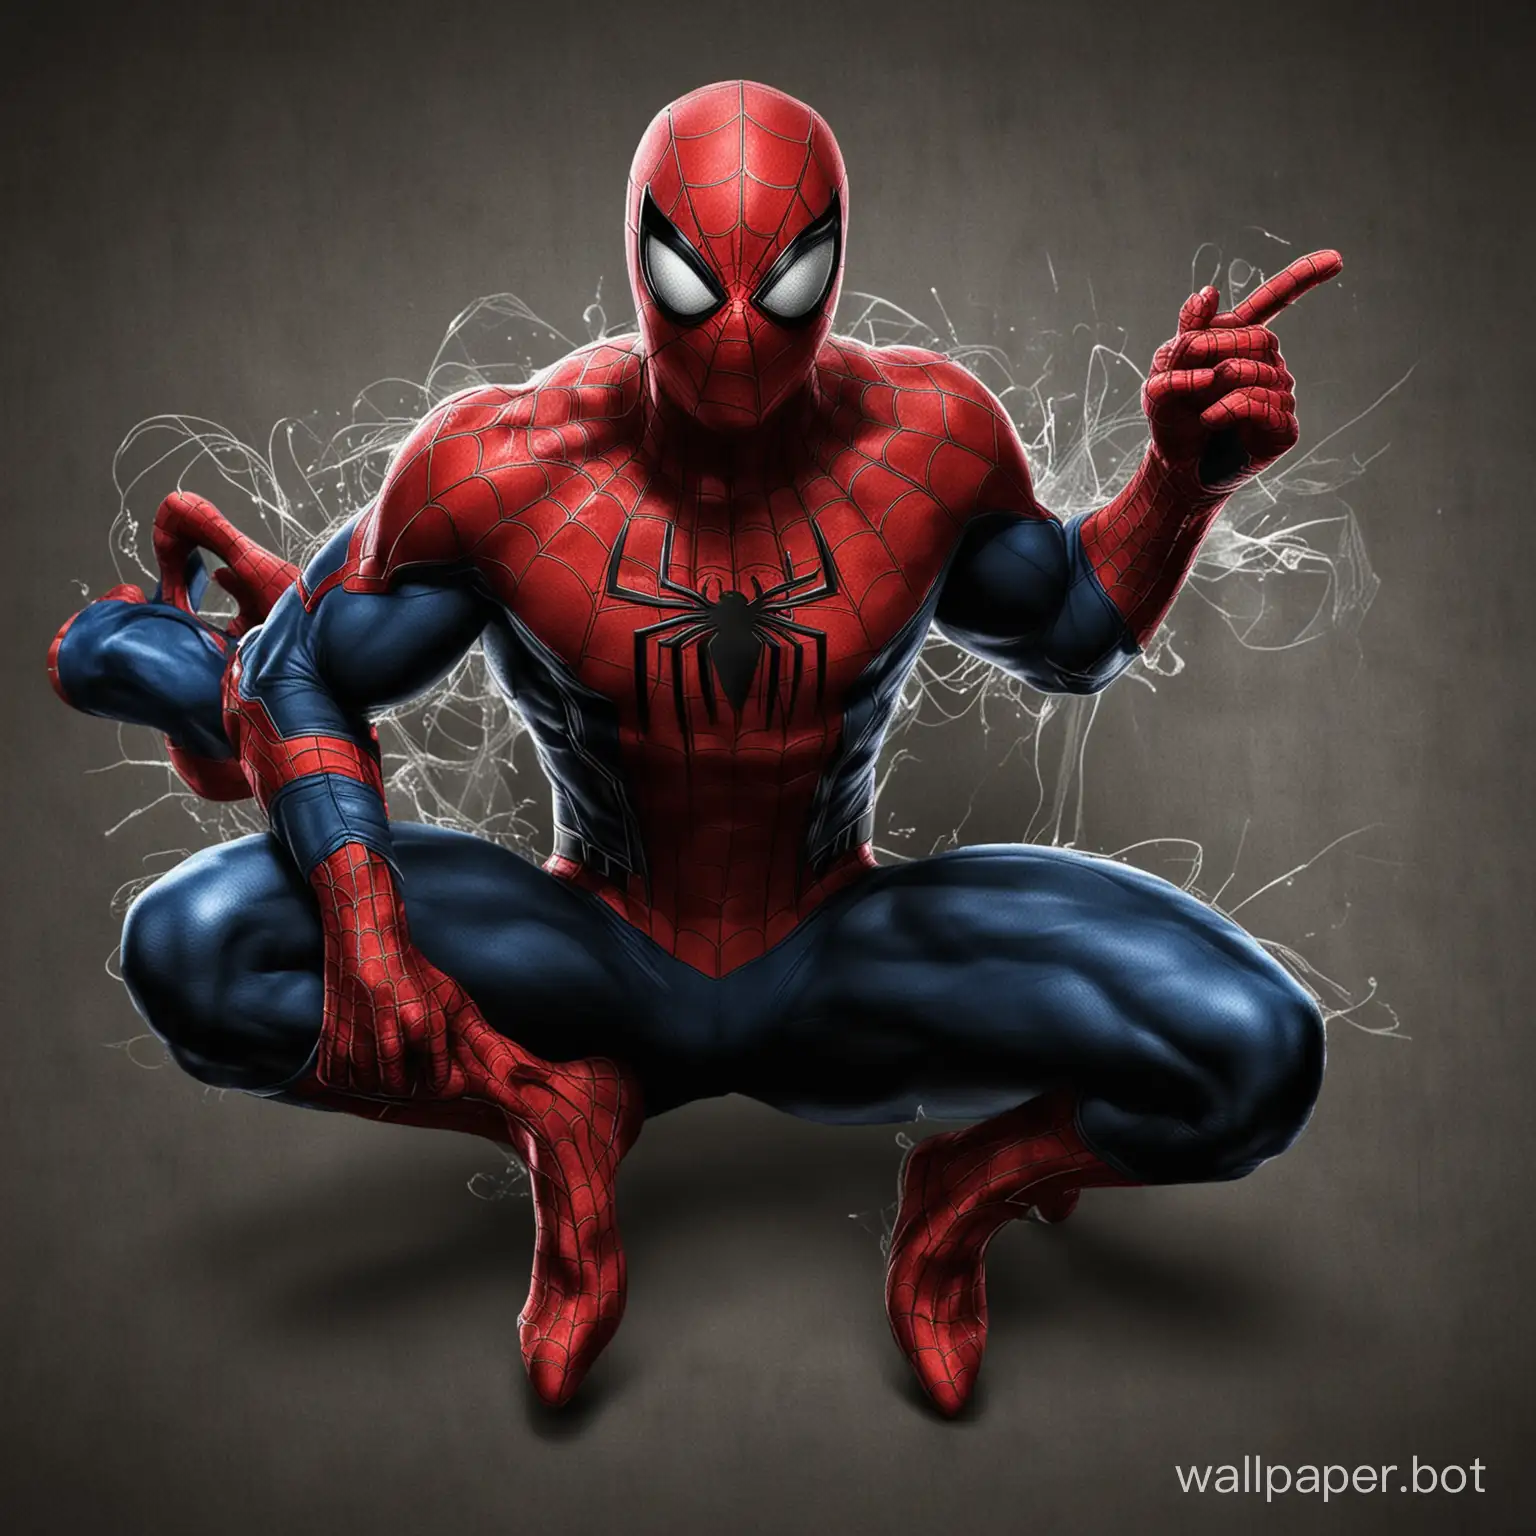 Spiderman wallpaper for my PC which should have a name prajay